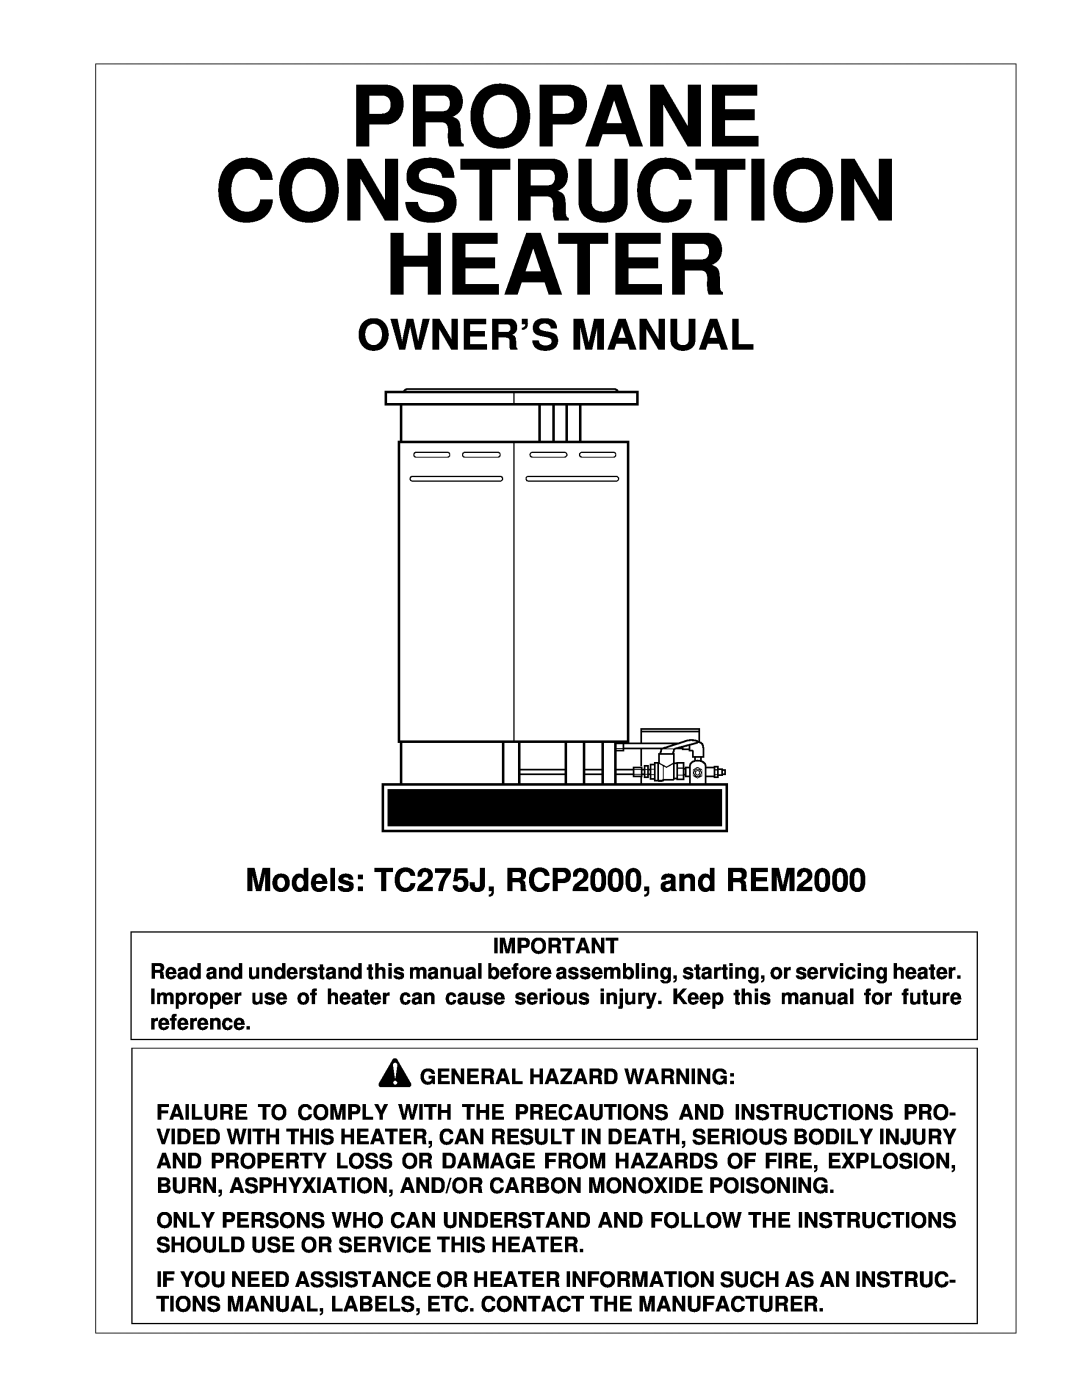 Desa owner manual Models TC275J, RCP2000, and REM2000, Propane Construction Heater, Owner’S Manual 